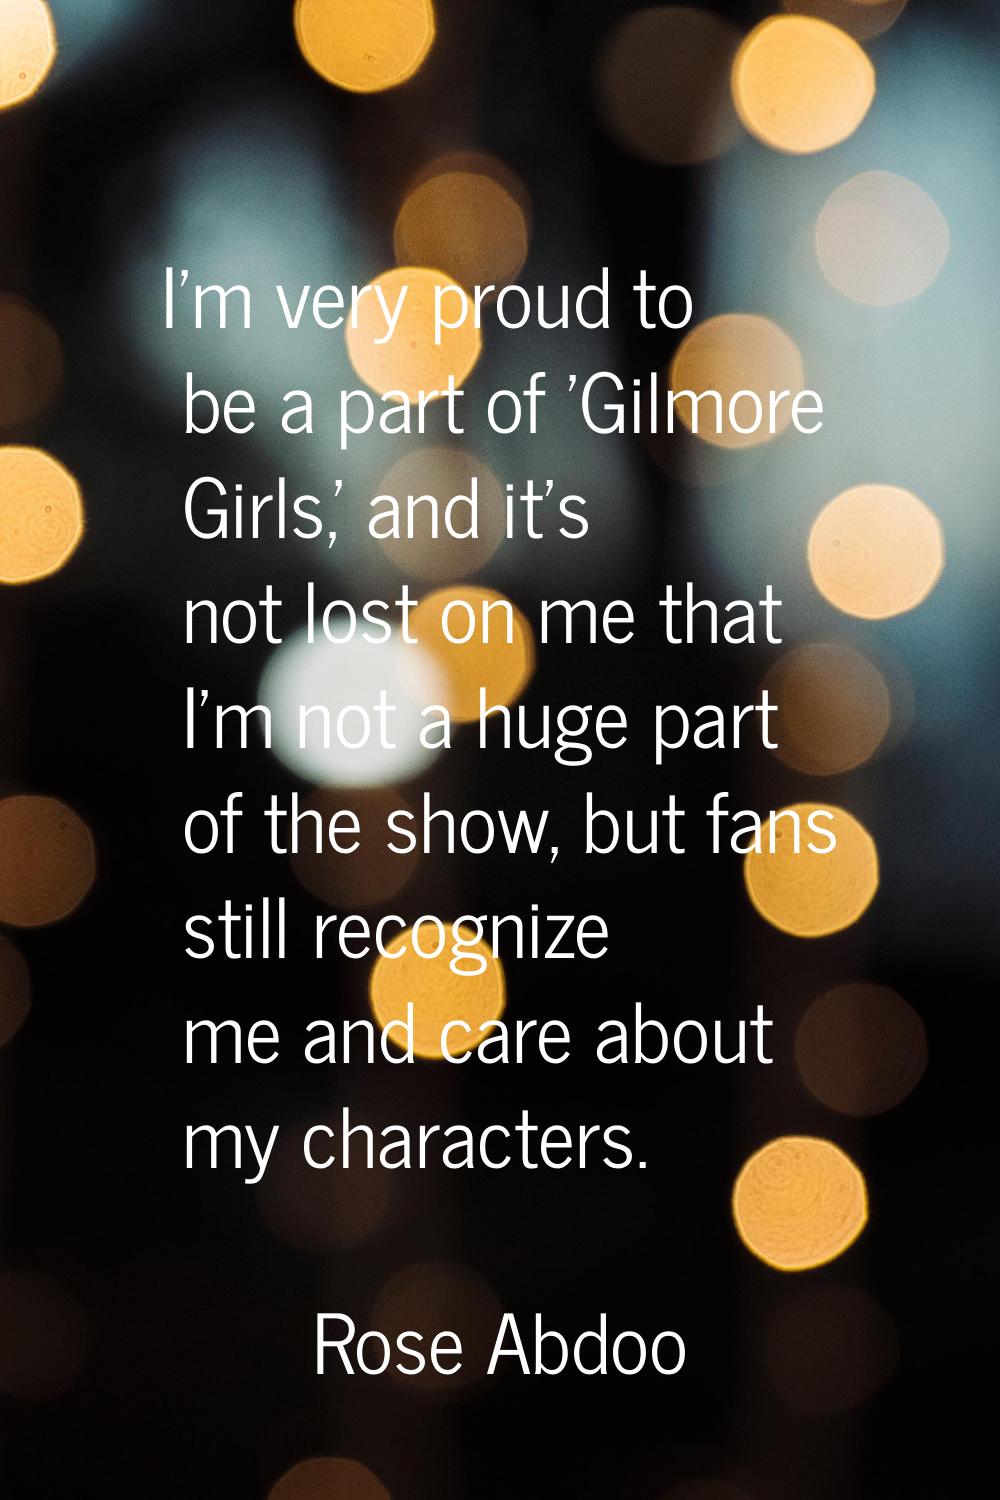 I'm very proud to be a part of 'Gilmore Girls,' and it's not lost on me that I'm not a huge part of